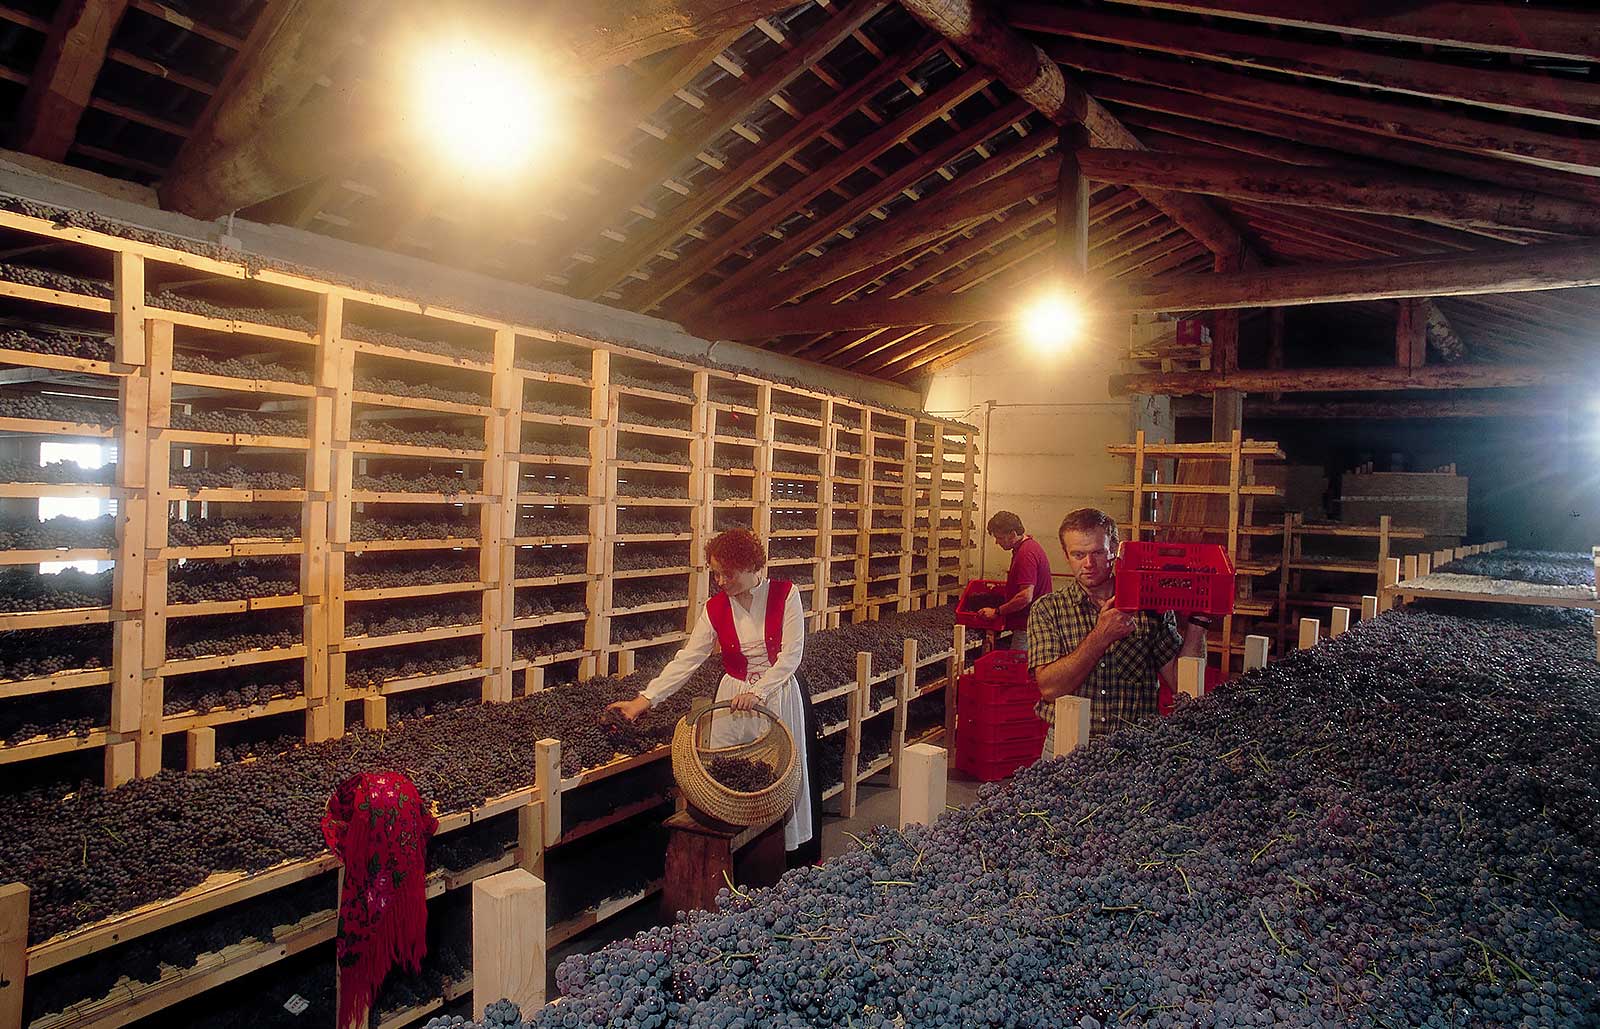 Grapes are treated in a cellar